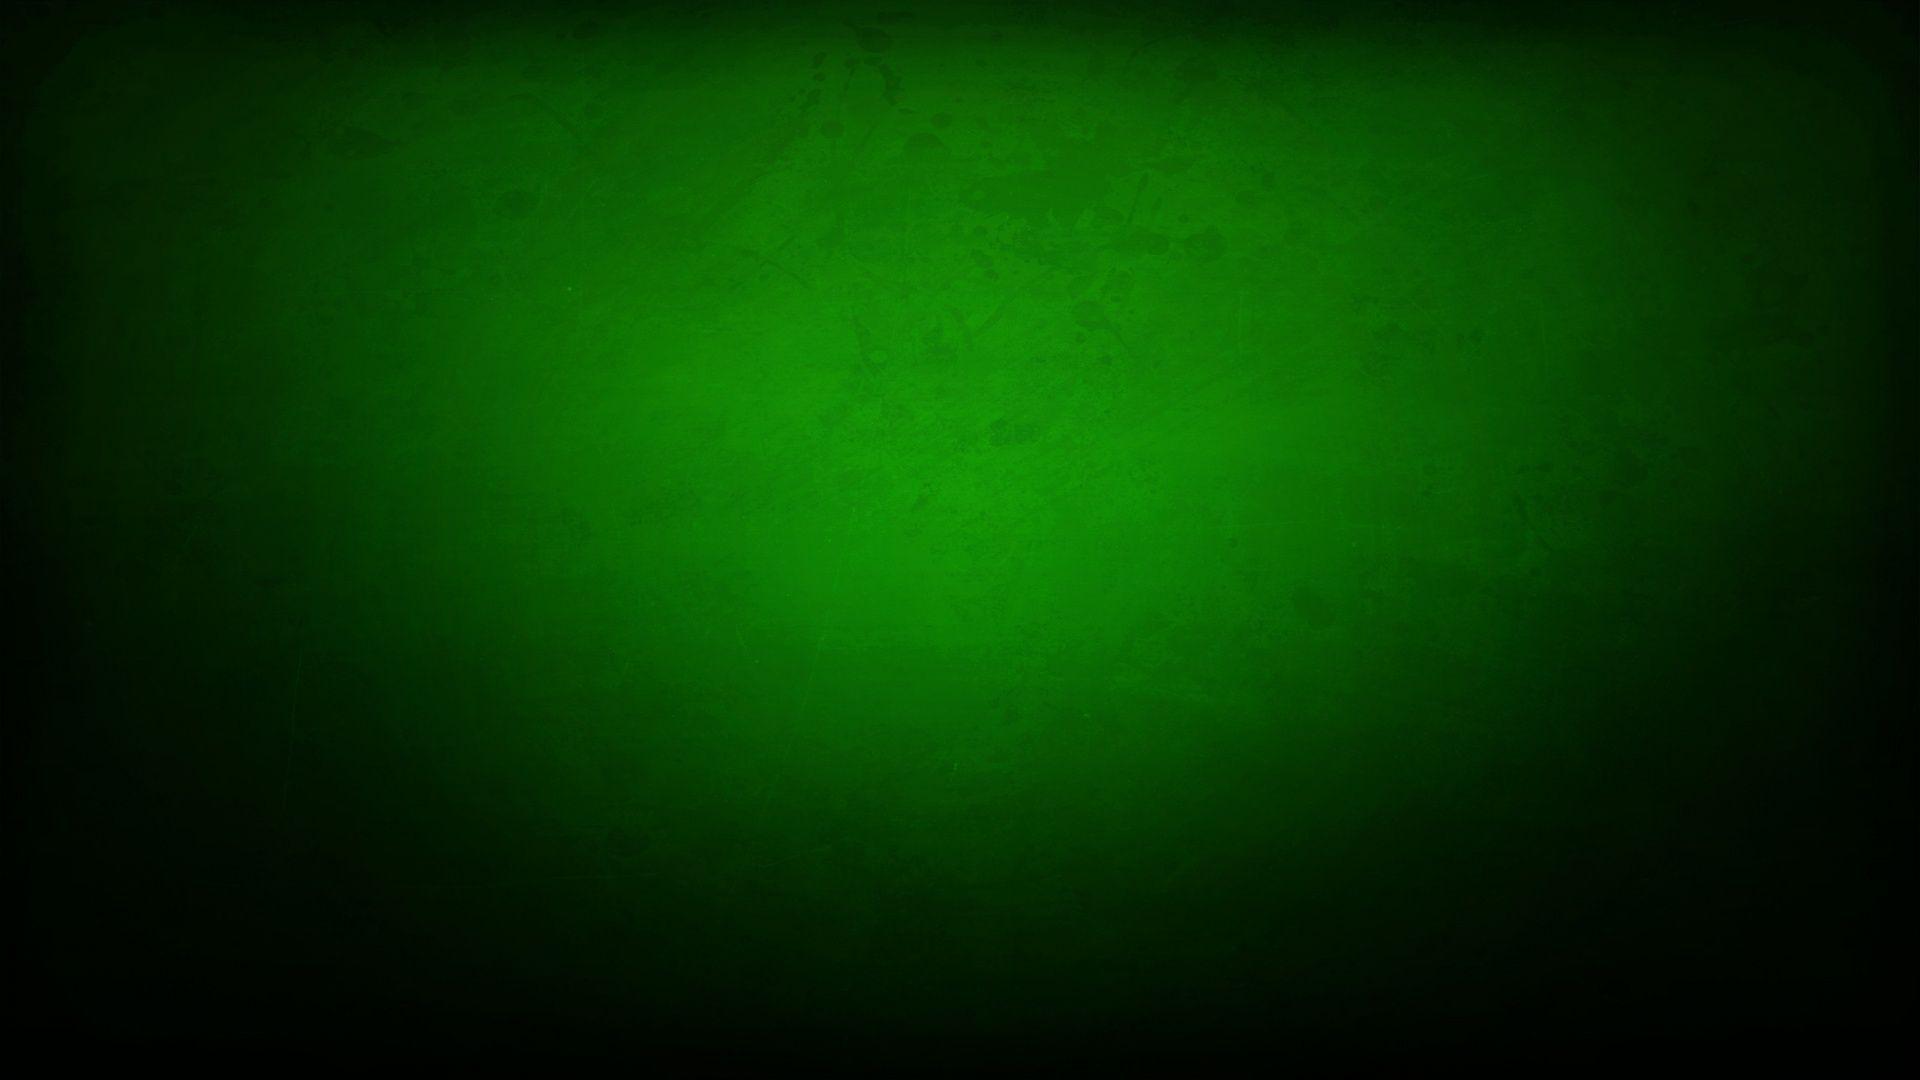 Wallpaper For > Cool Green And Black Background